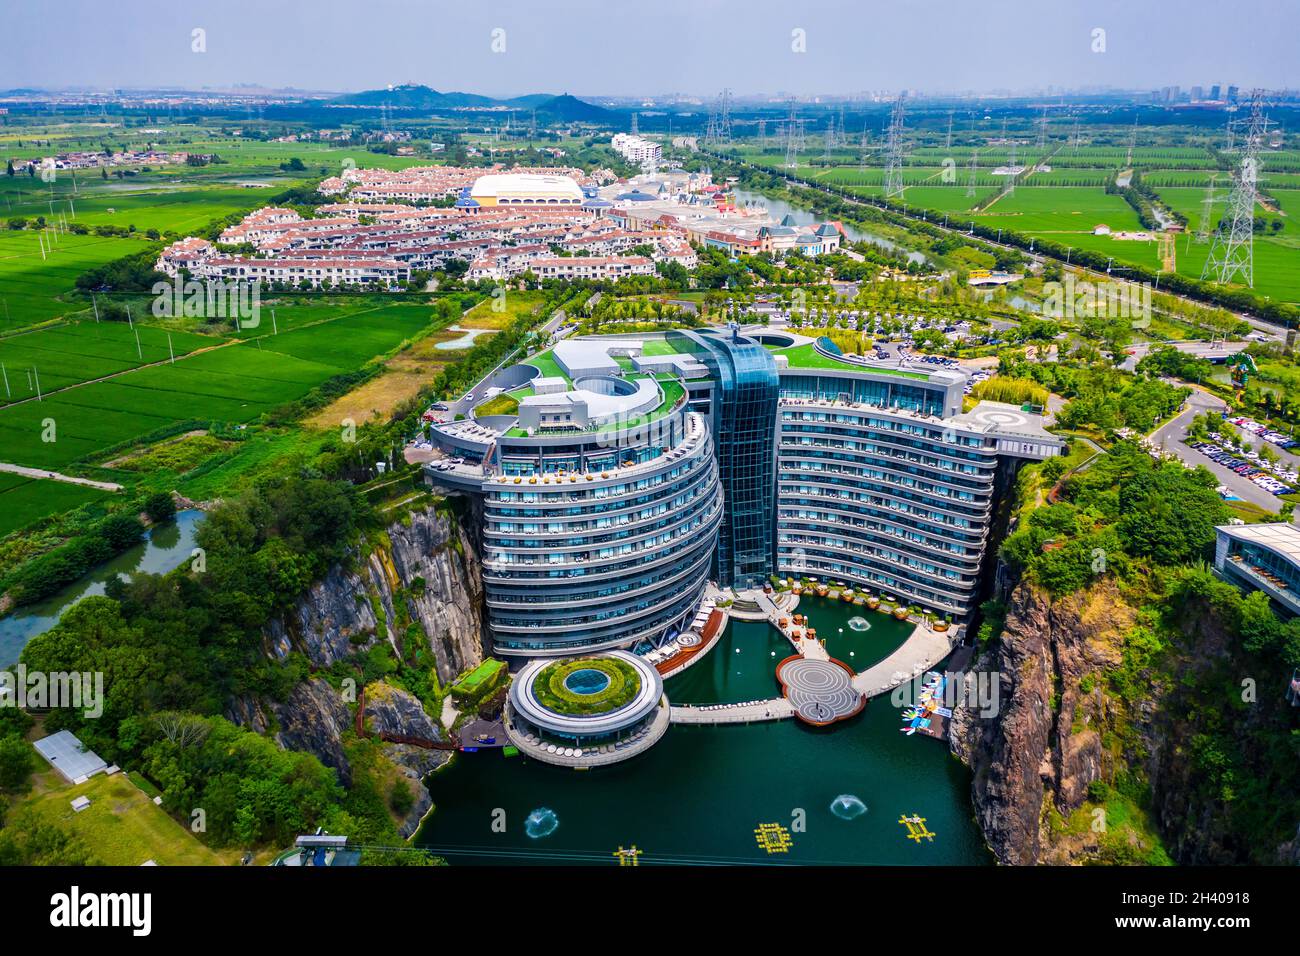 Shanghai,China - August 23,2020:Shimao Shenkeng Intercontinental Hotel in Shanghai Sheshan,the altitude is minus 88 meters.It is the world's first nat Stock Photo